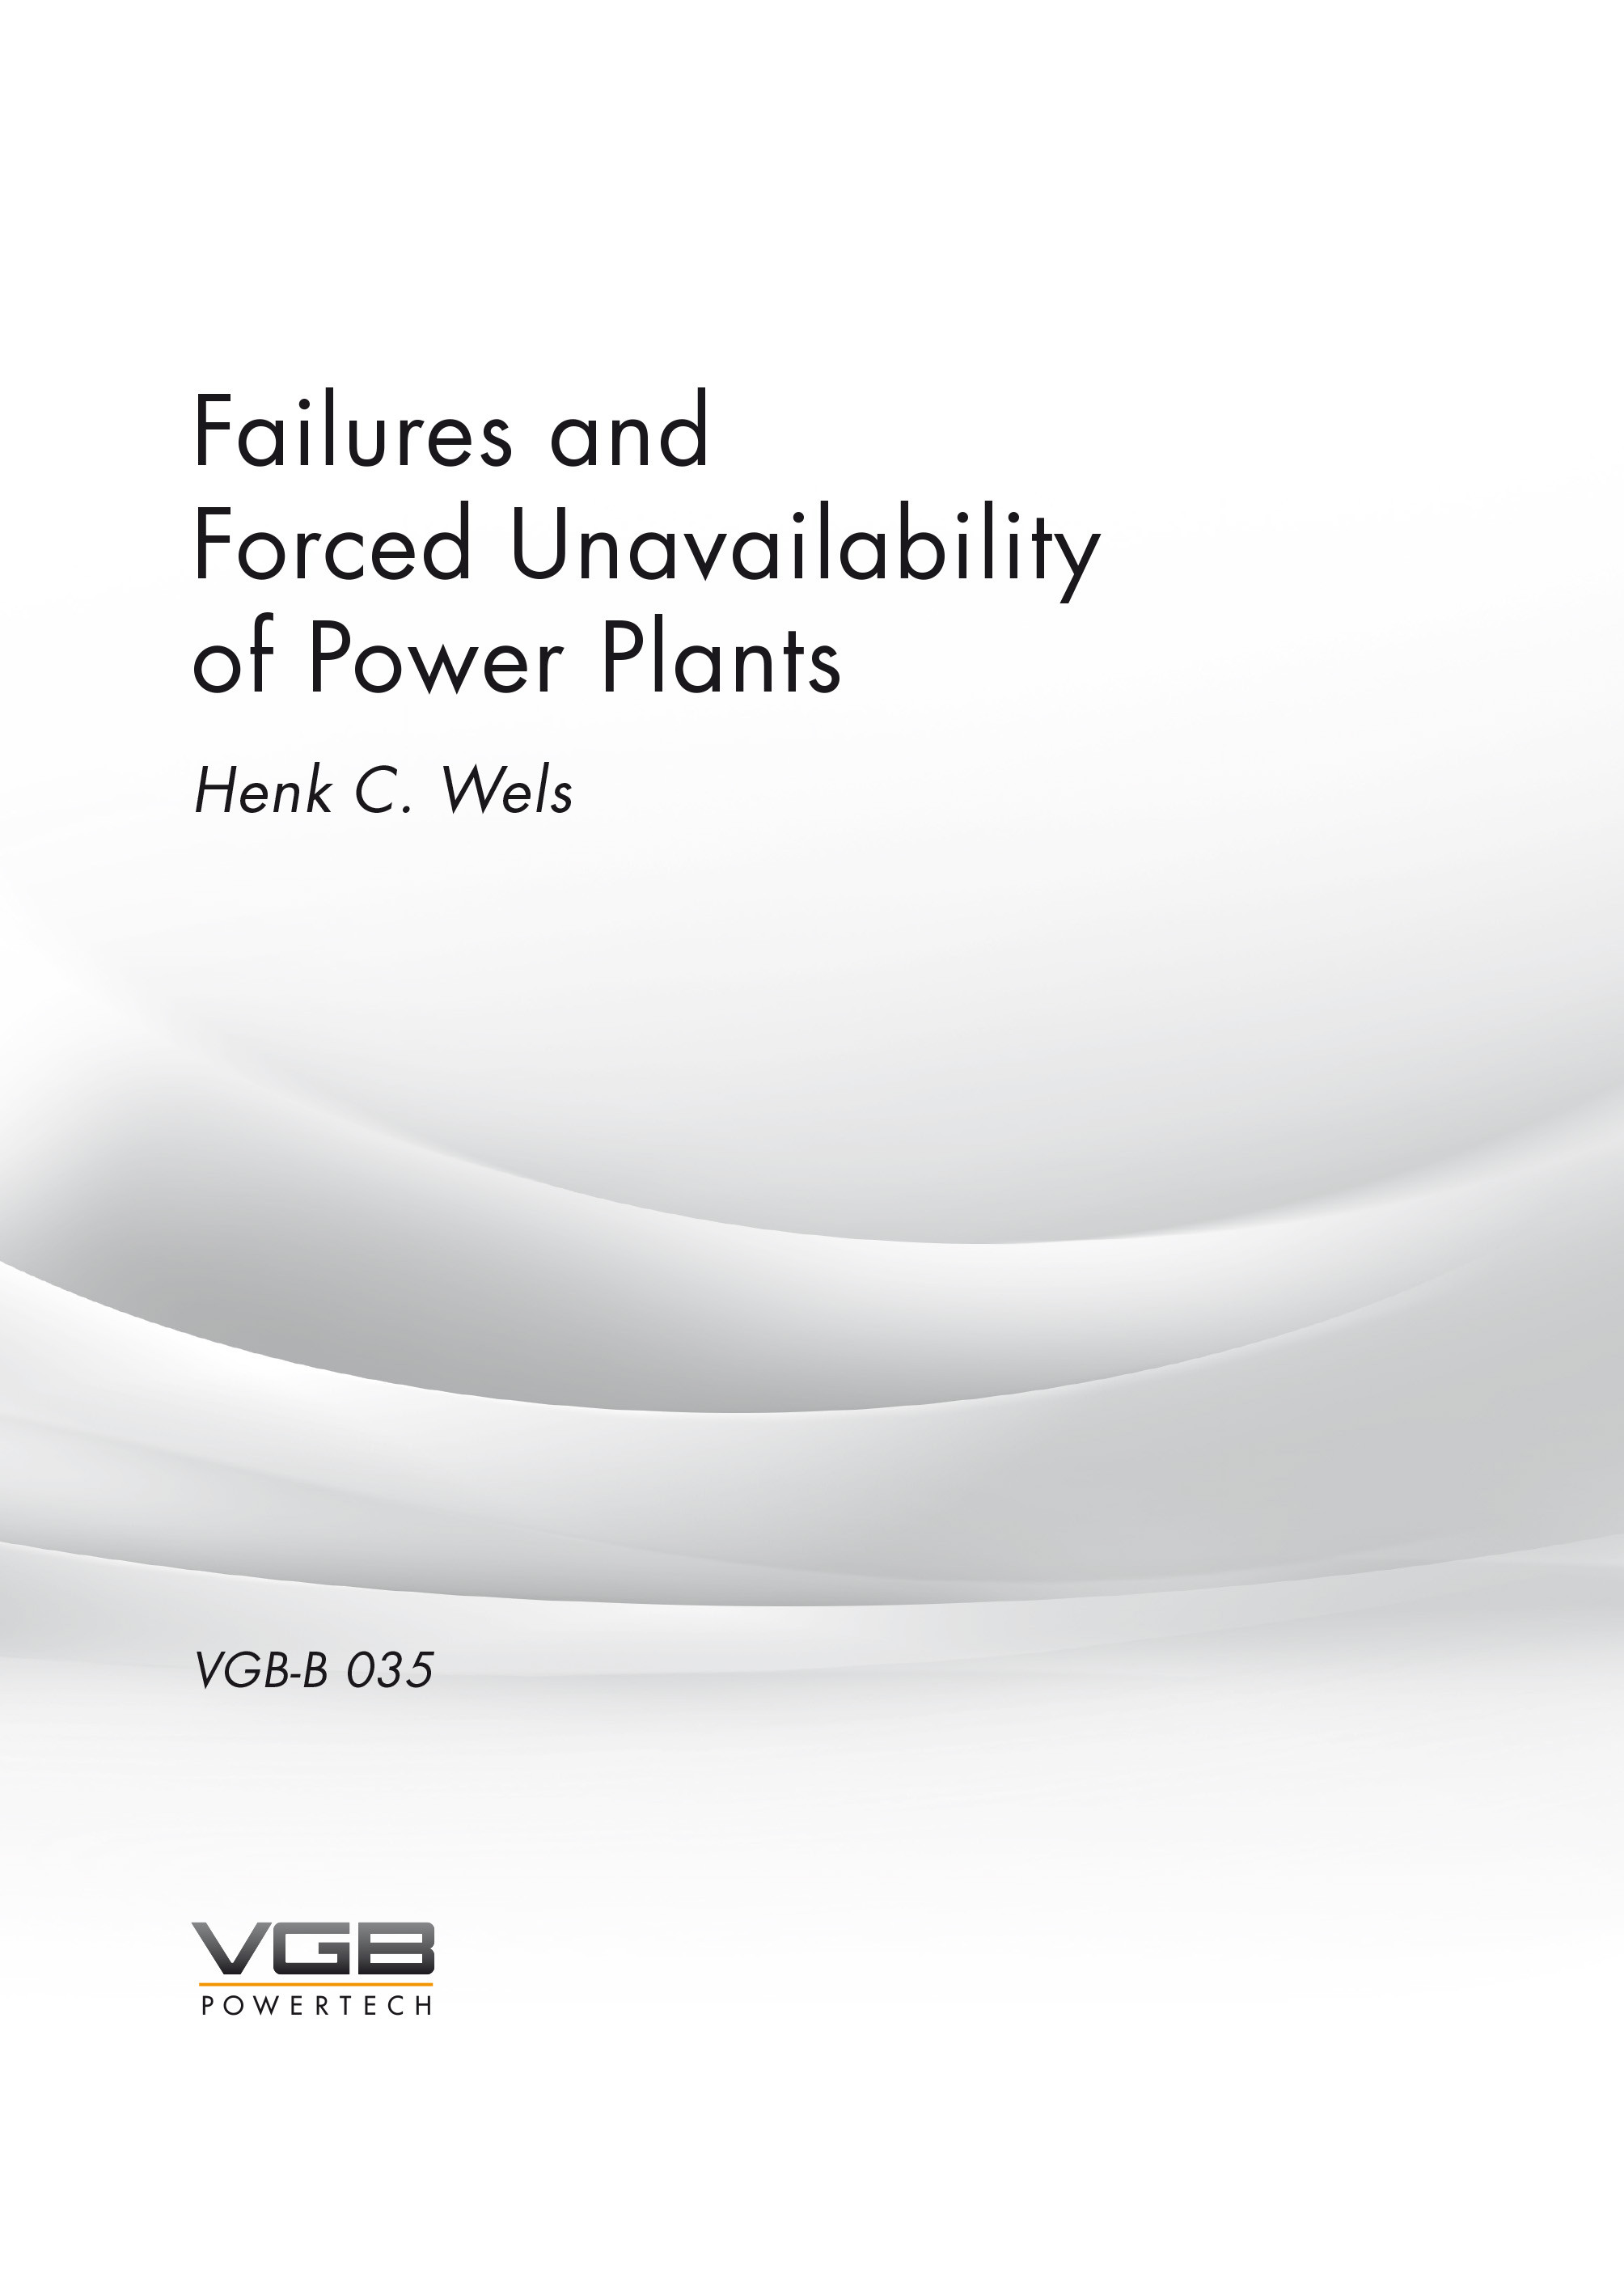 Failures and Forced Unavailability of Power Plants (Henk C. Wels, ebook)